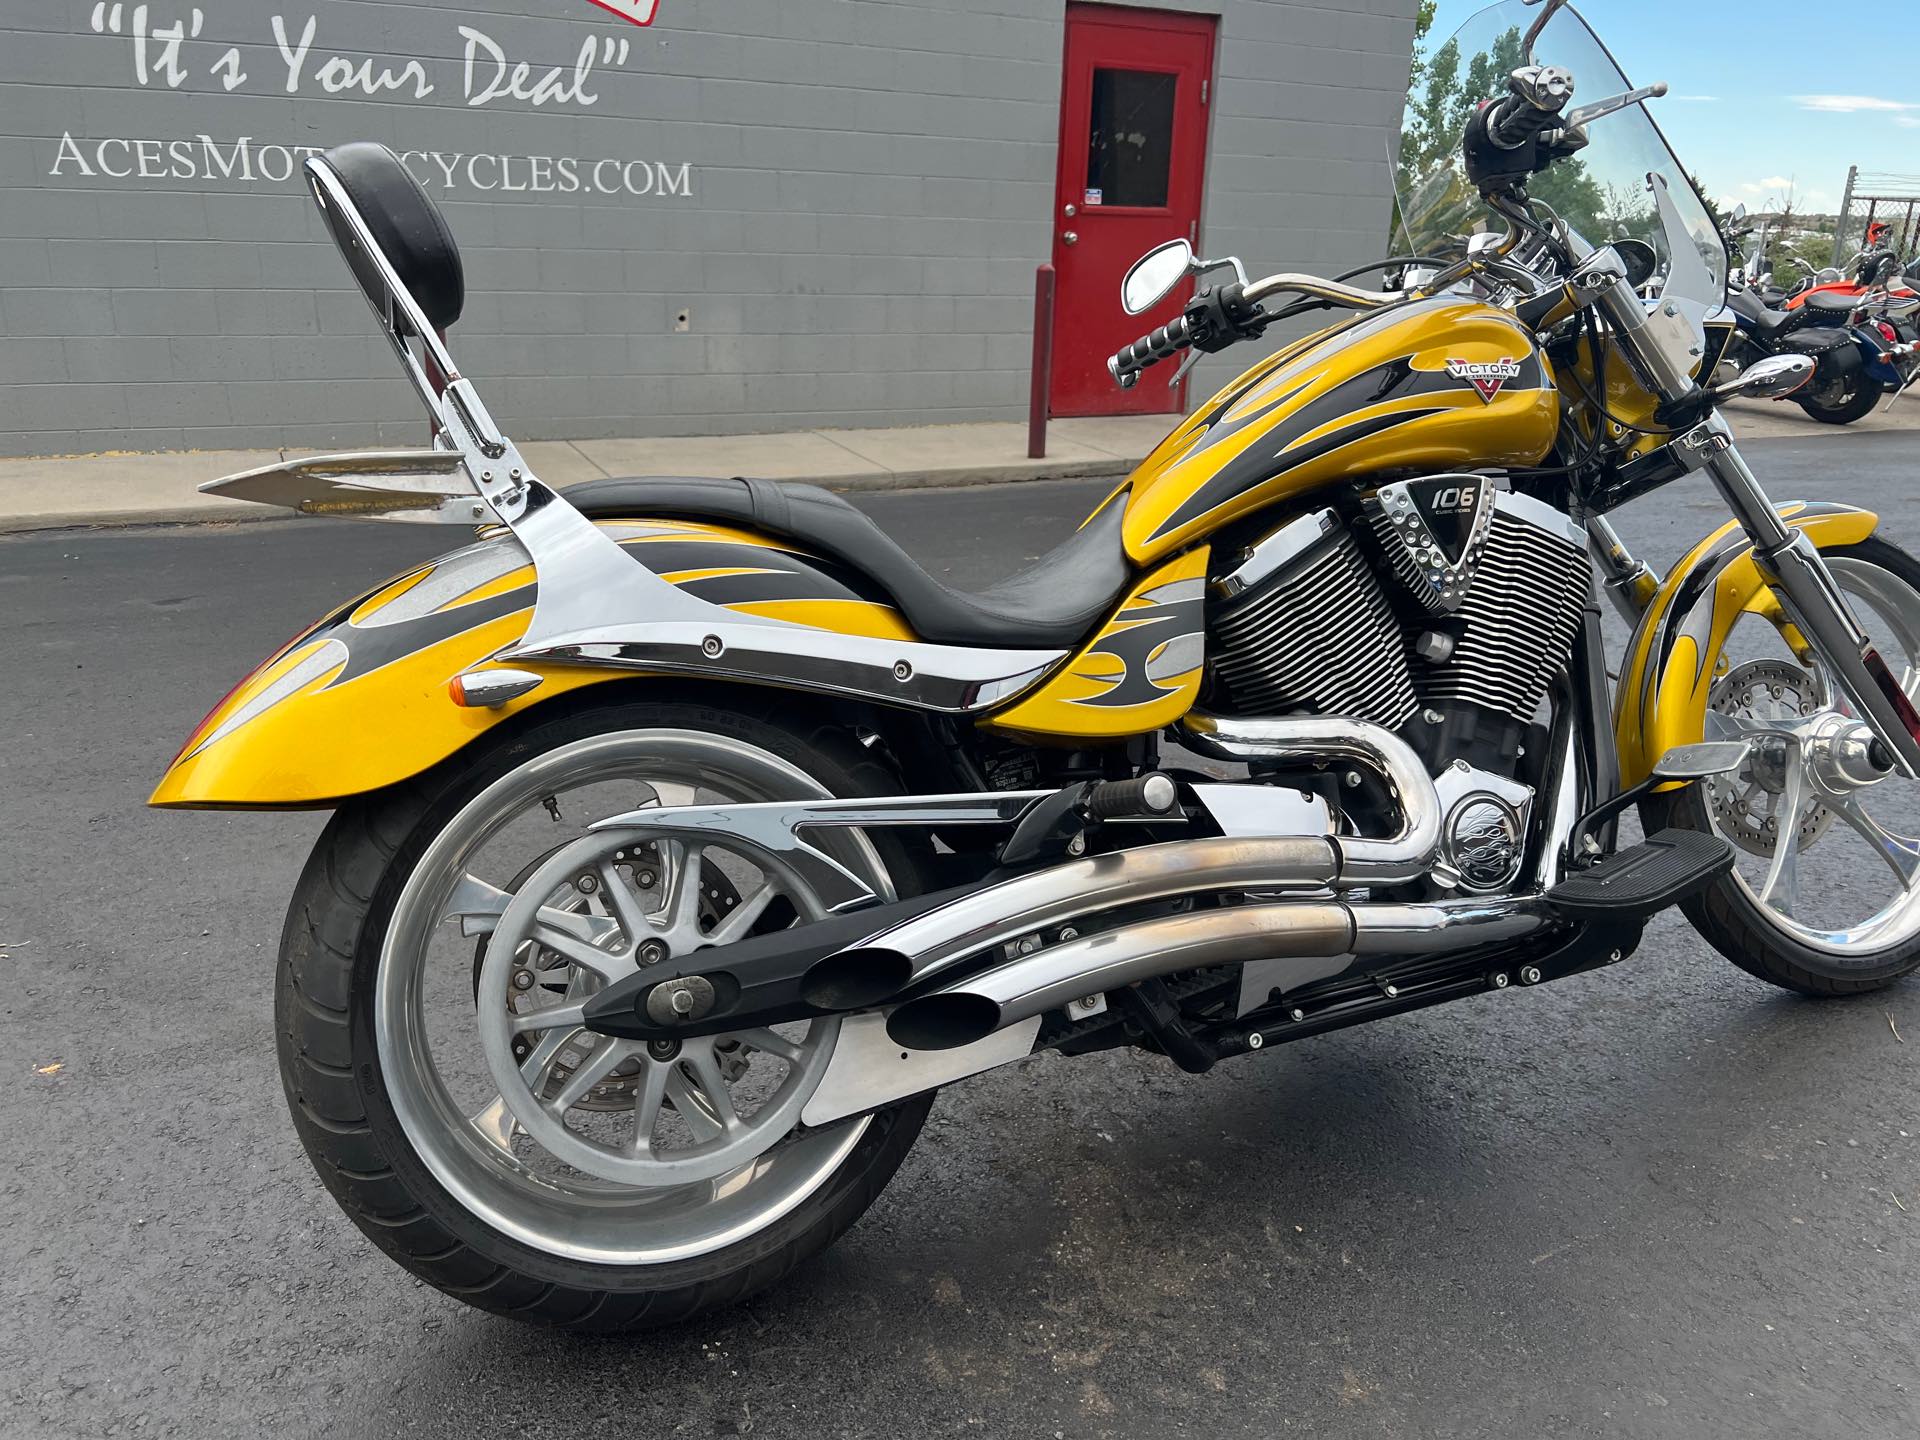 2010 Victory Jackpot Base at Aces Motorcycles - Fort Collins